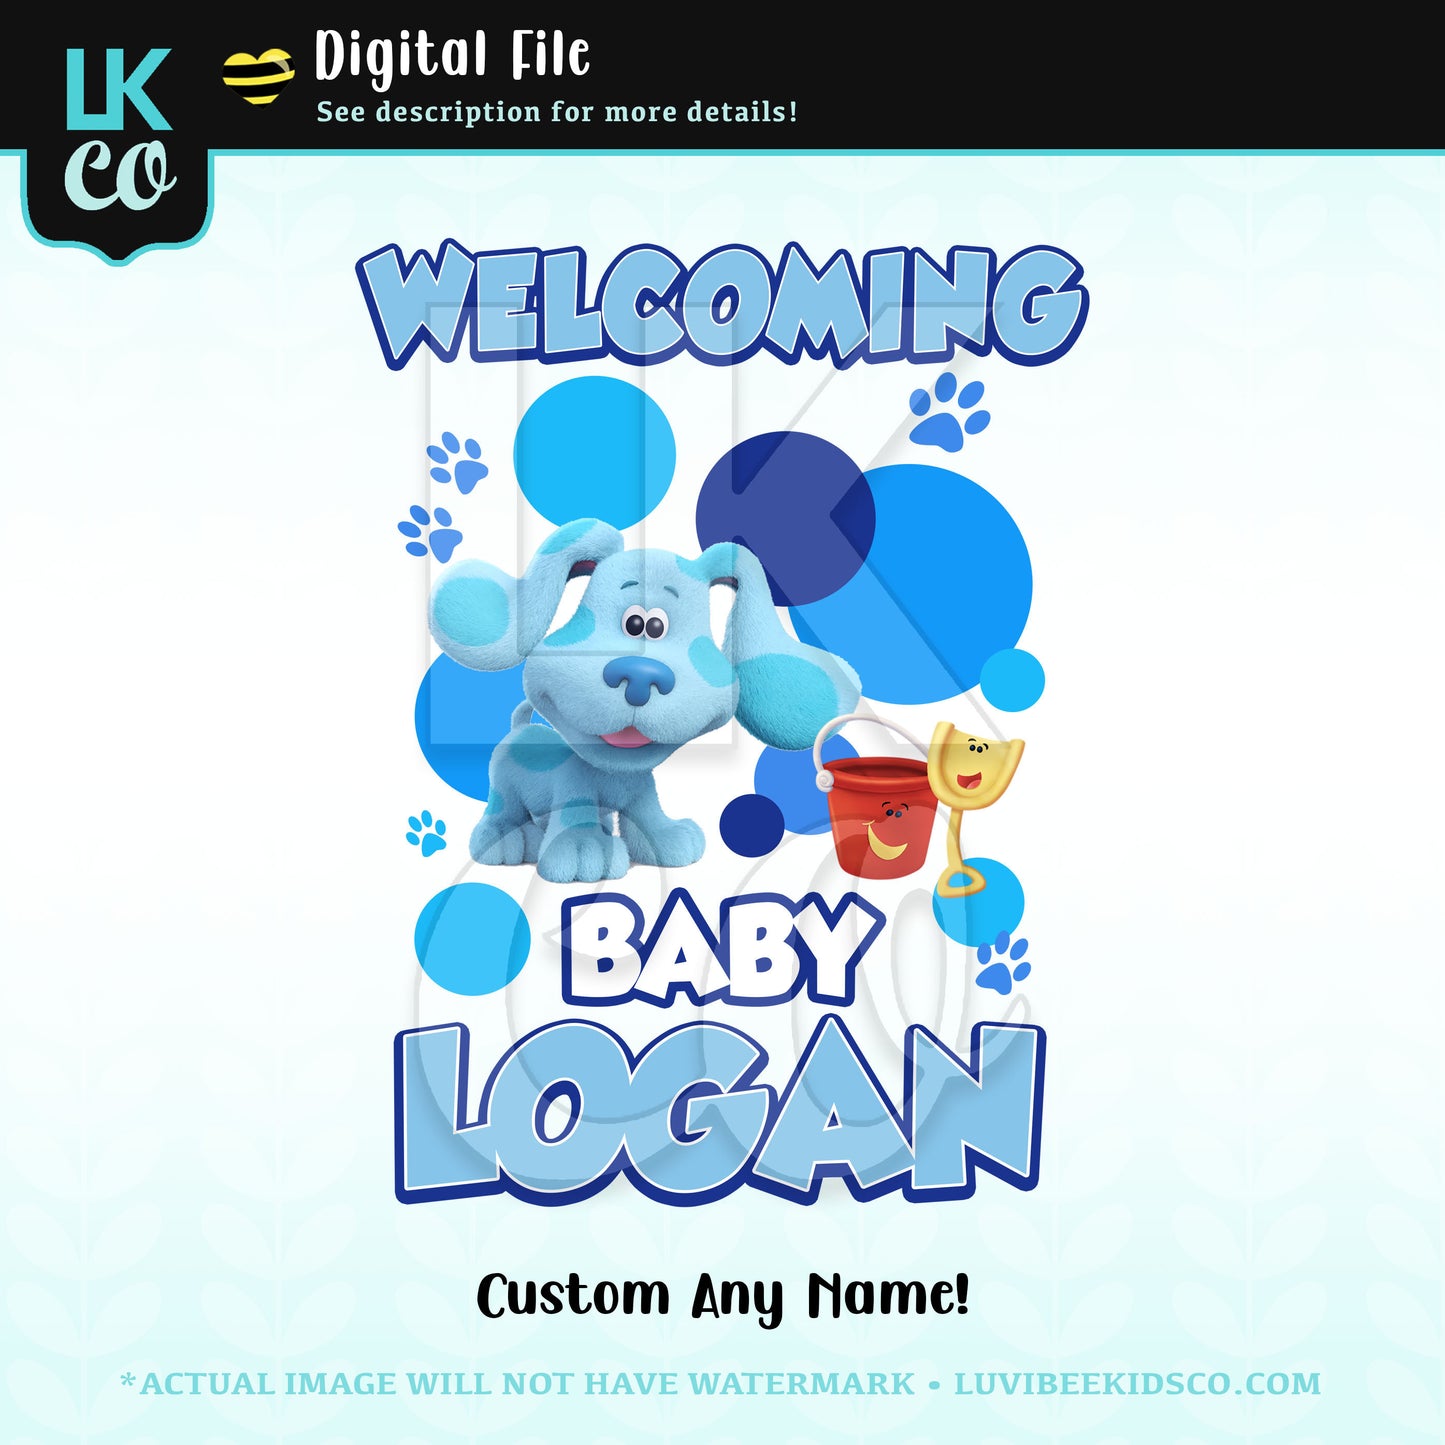 Blues Clues Digital File [12-24hr email] for Baby Shower - Any Name